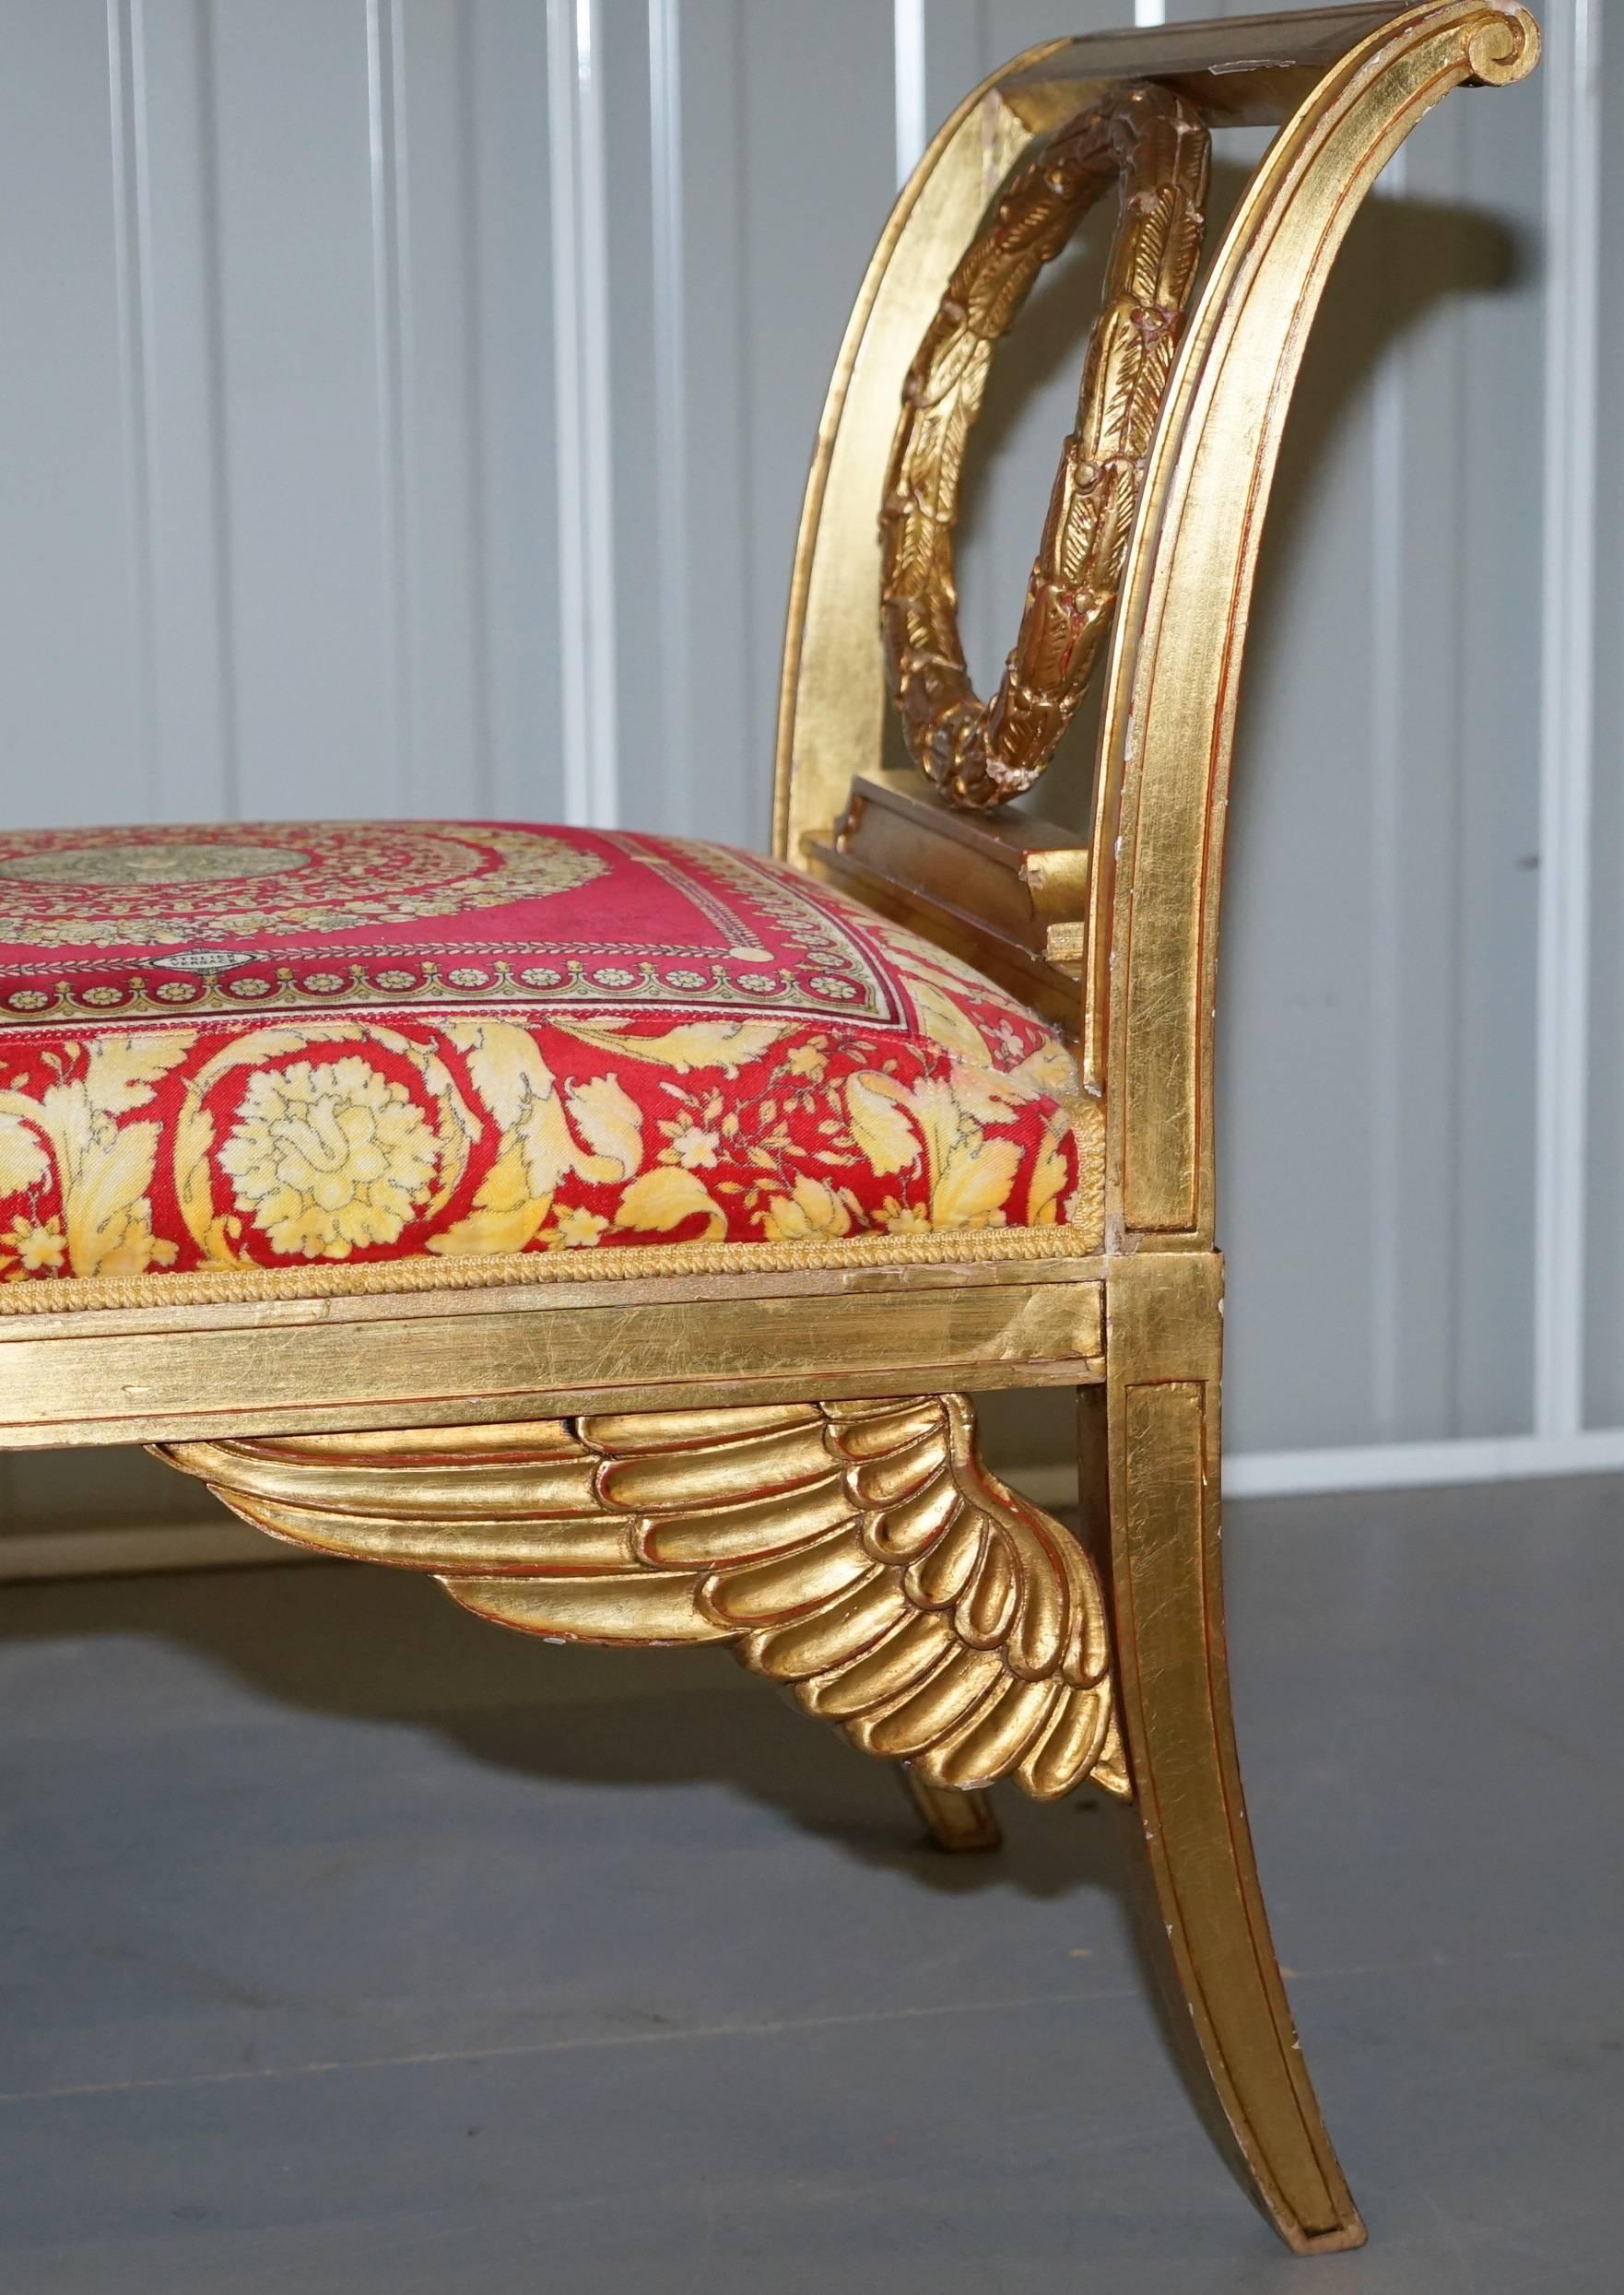 French Provincial Versace Gold Leaf Painted French Window Seat Original Upholstery